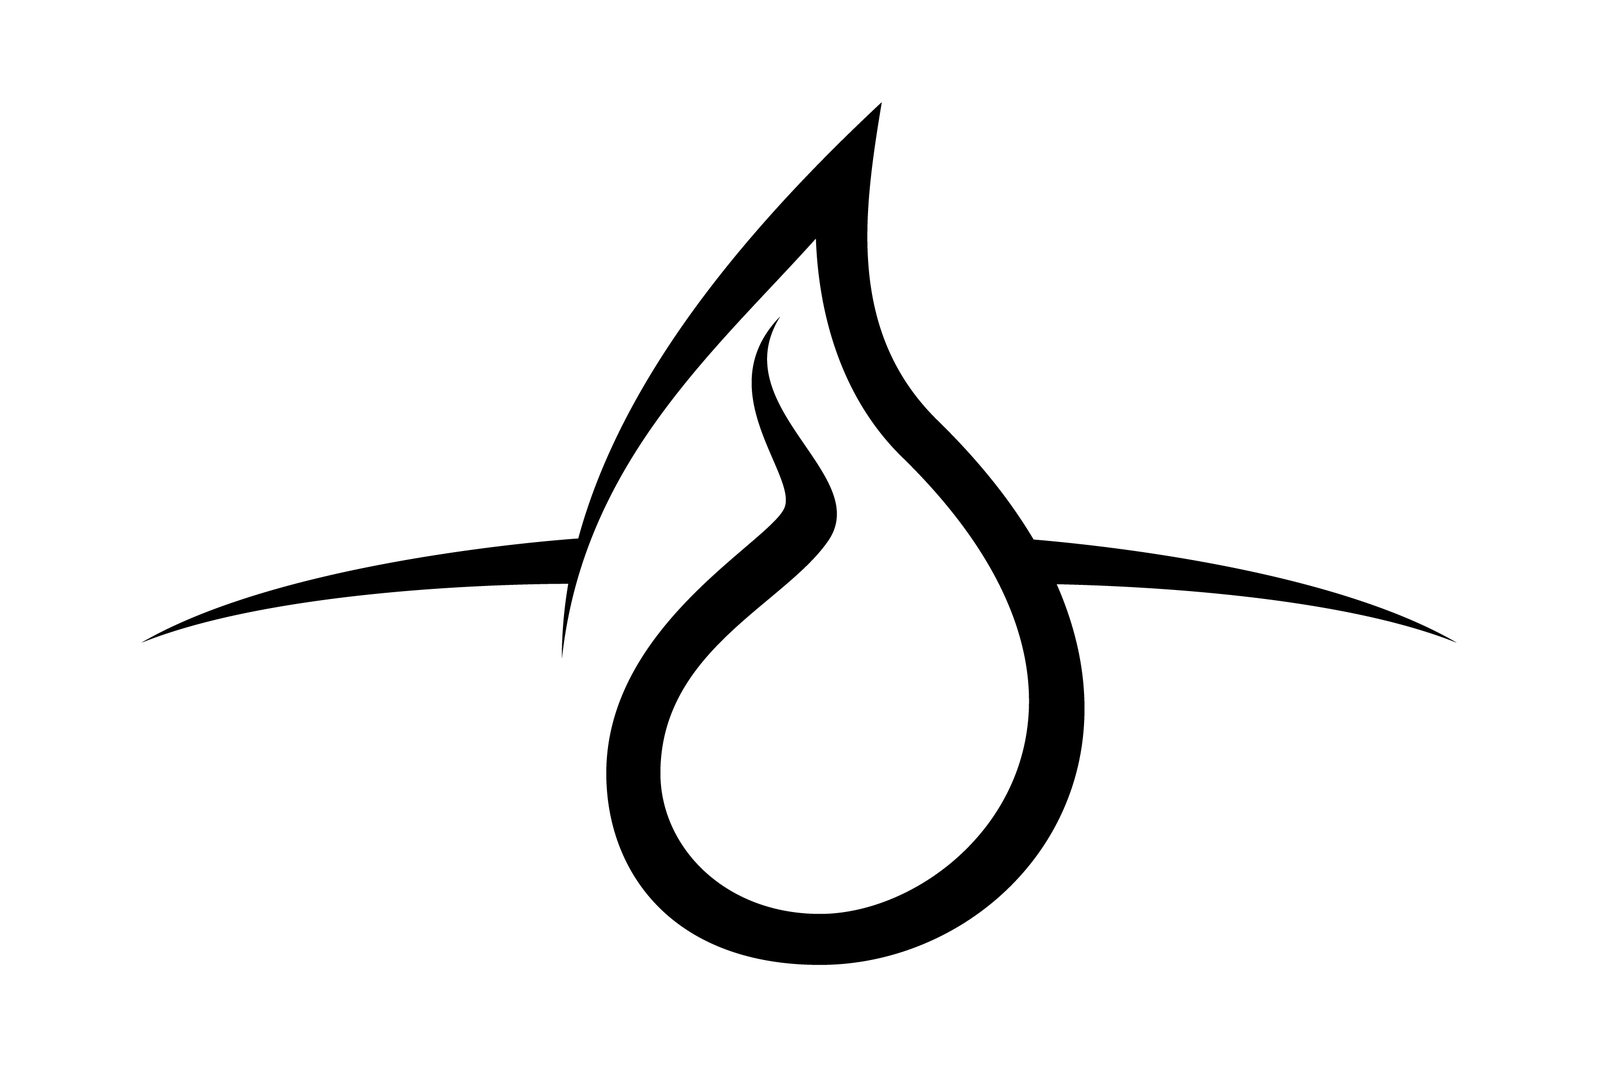 the symbol of water in a drop or flame